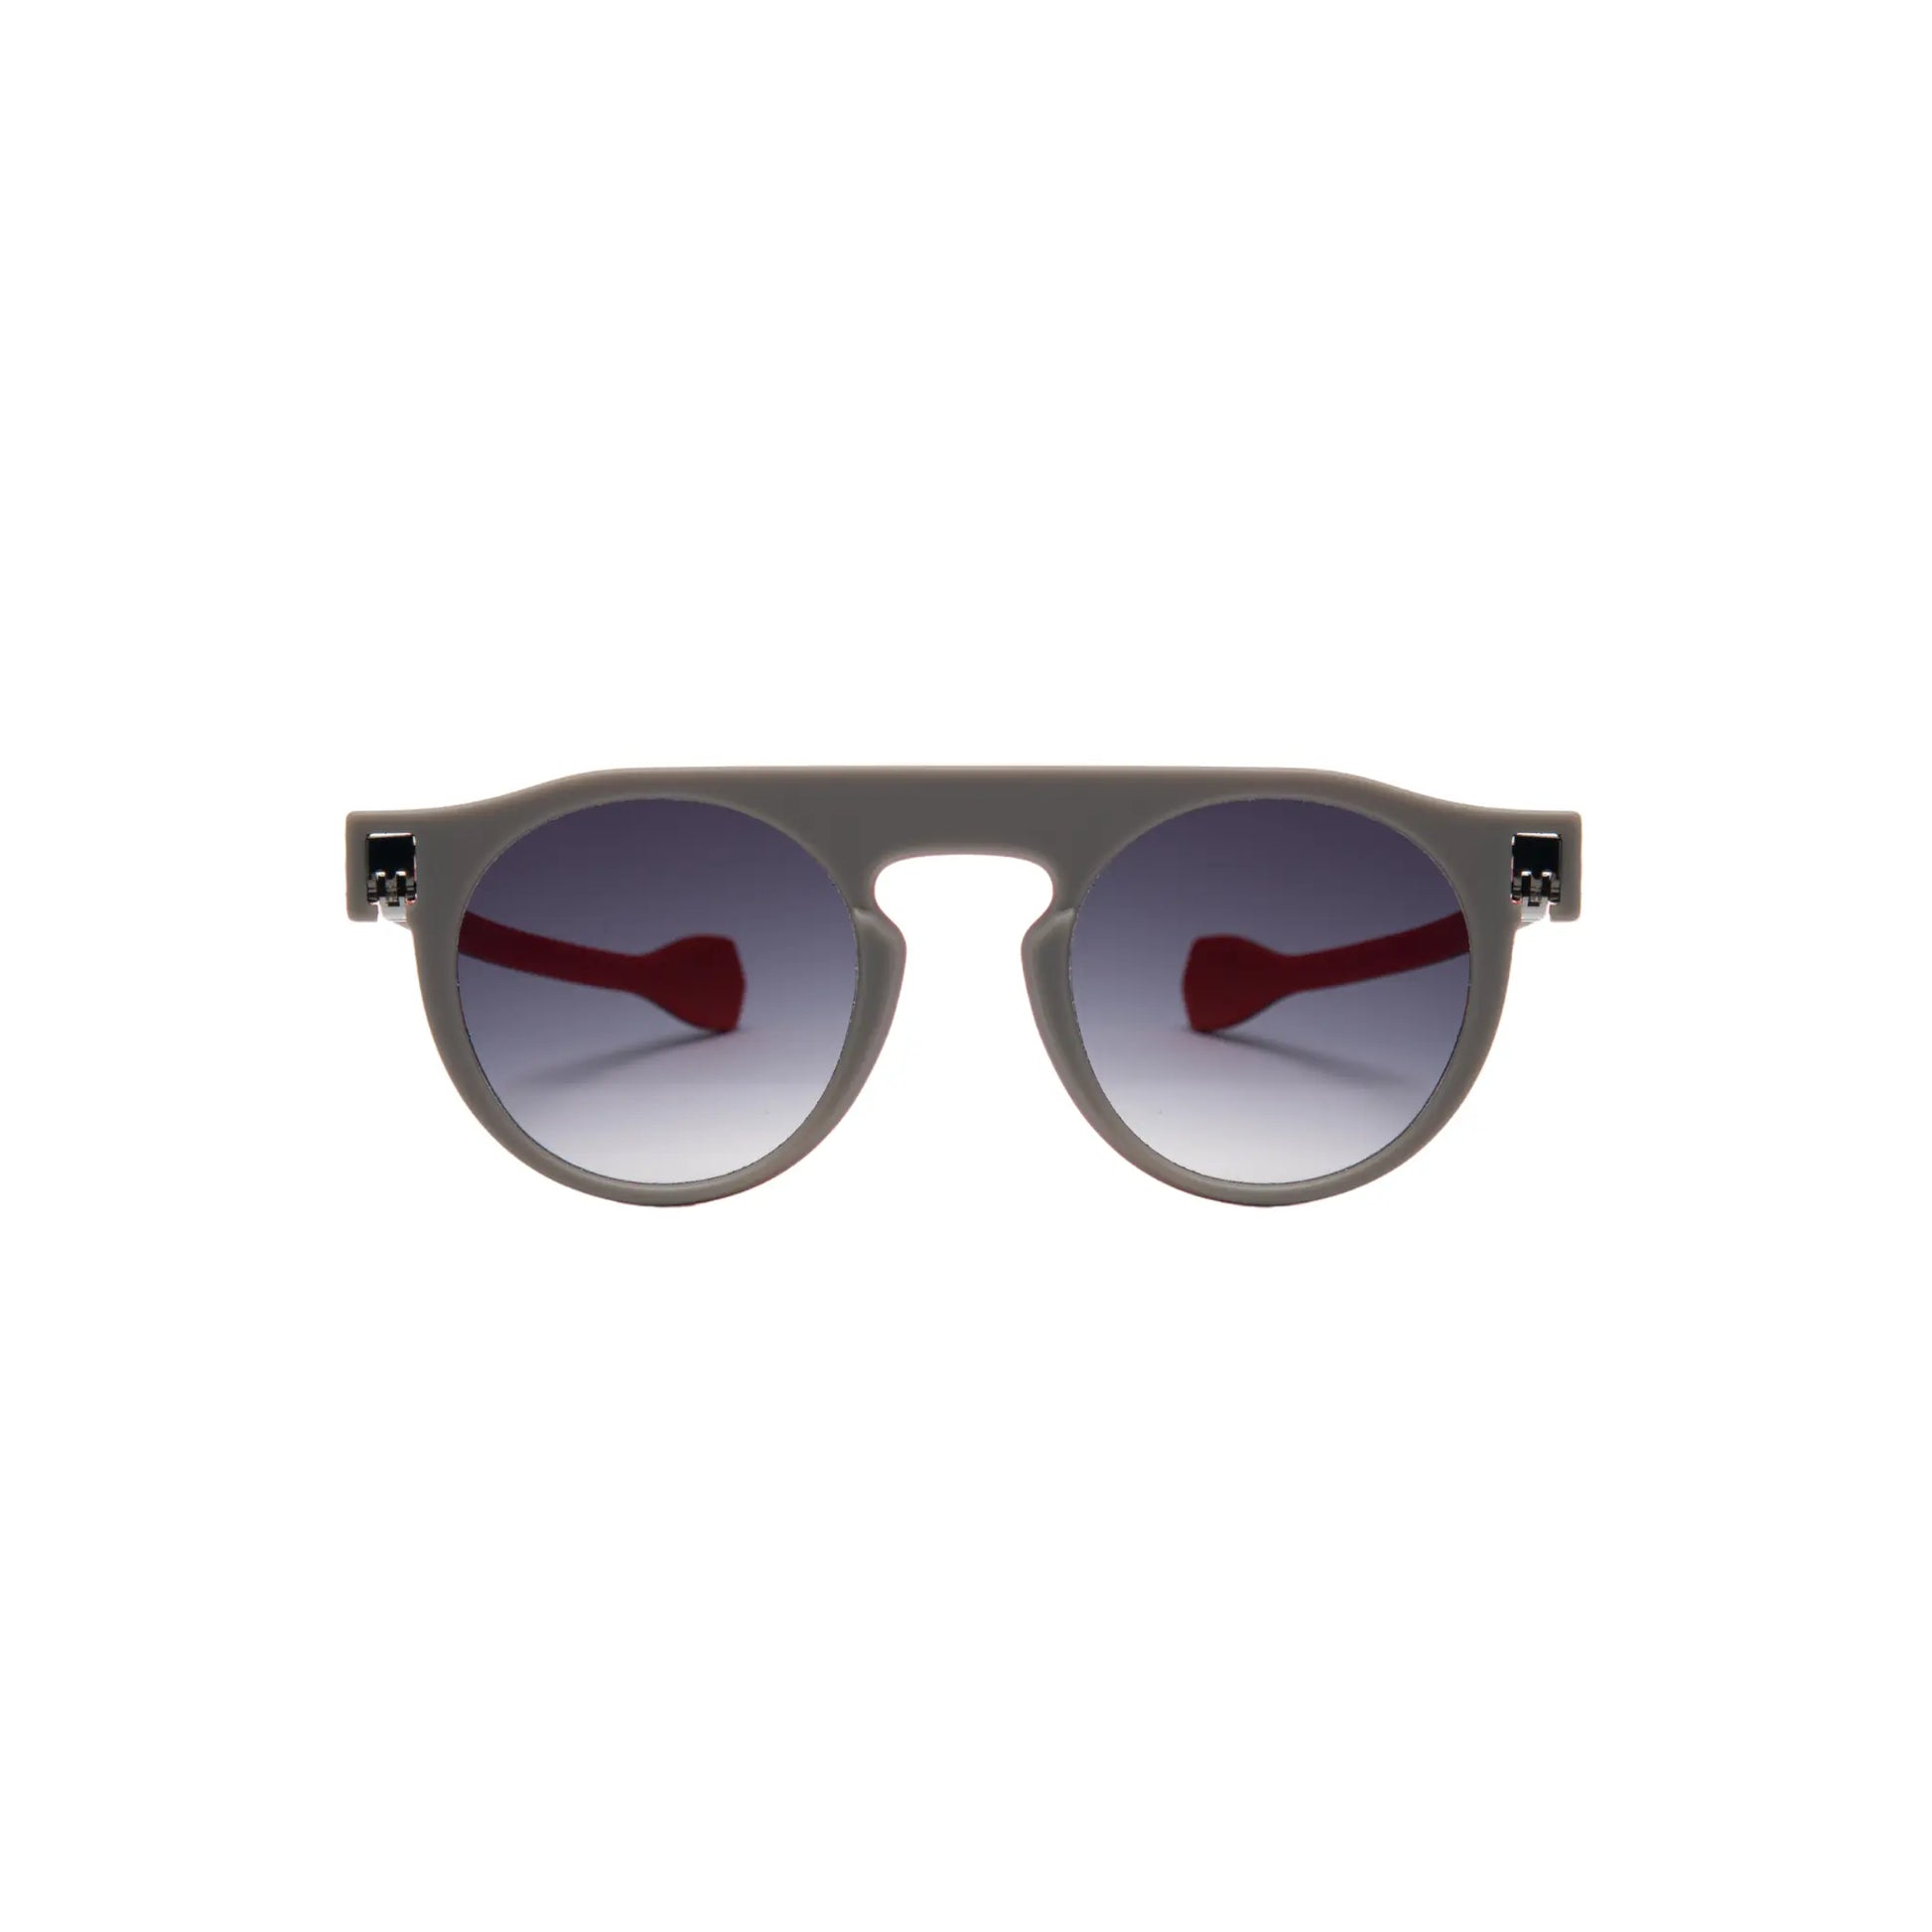 Reverso sunglasses grey & red reversible & ultra light front view 1